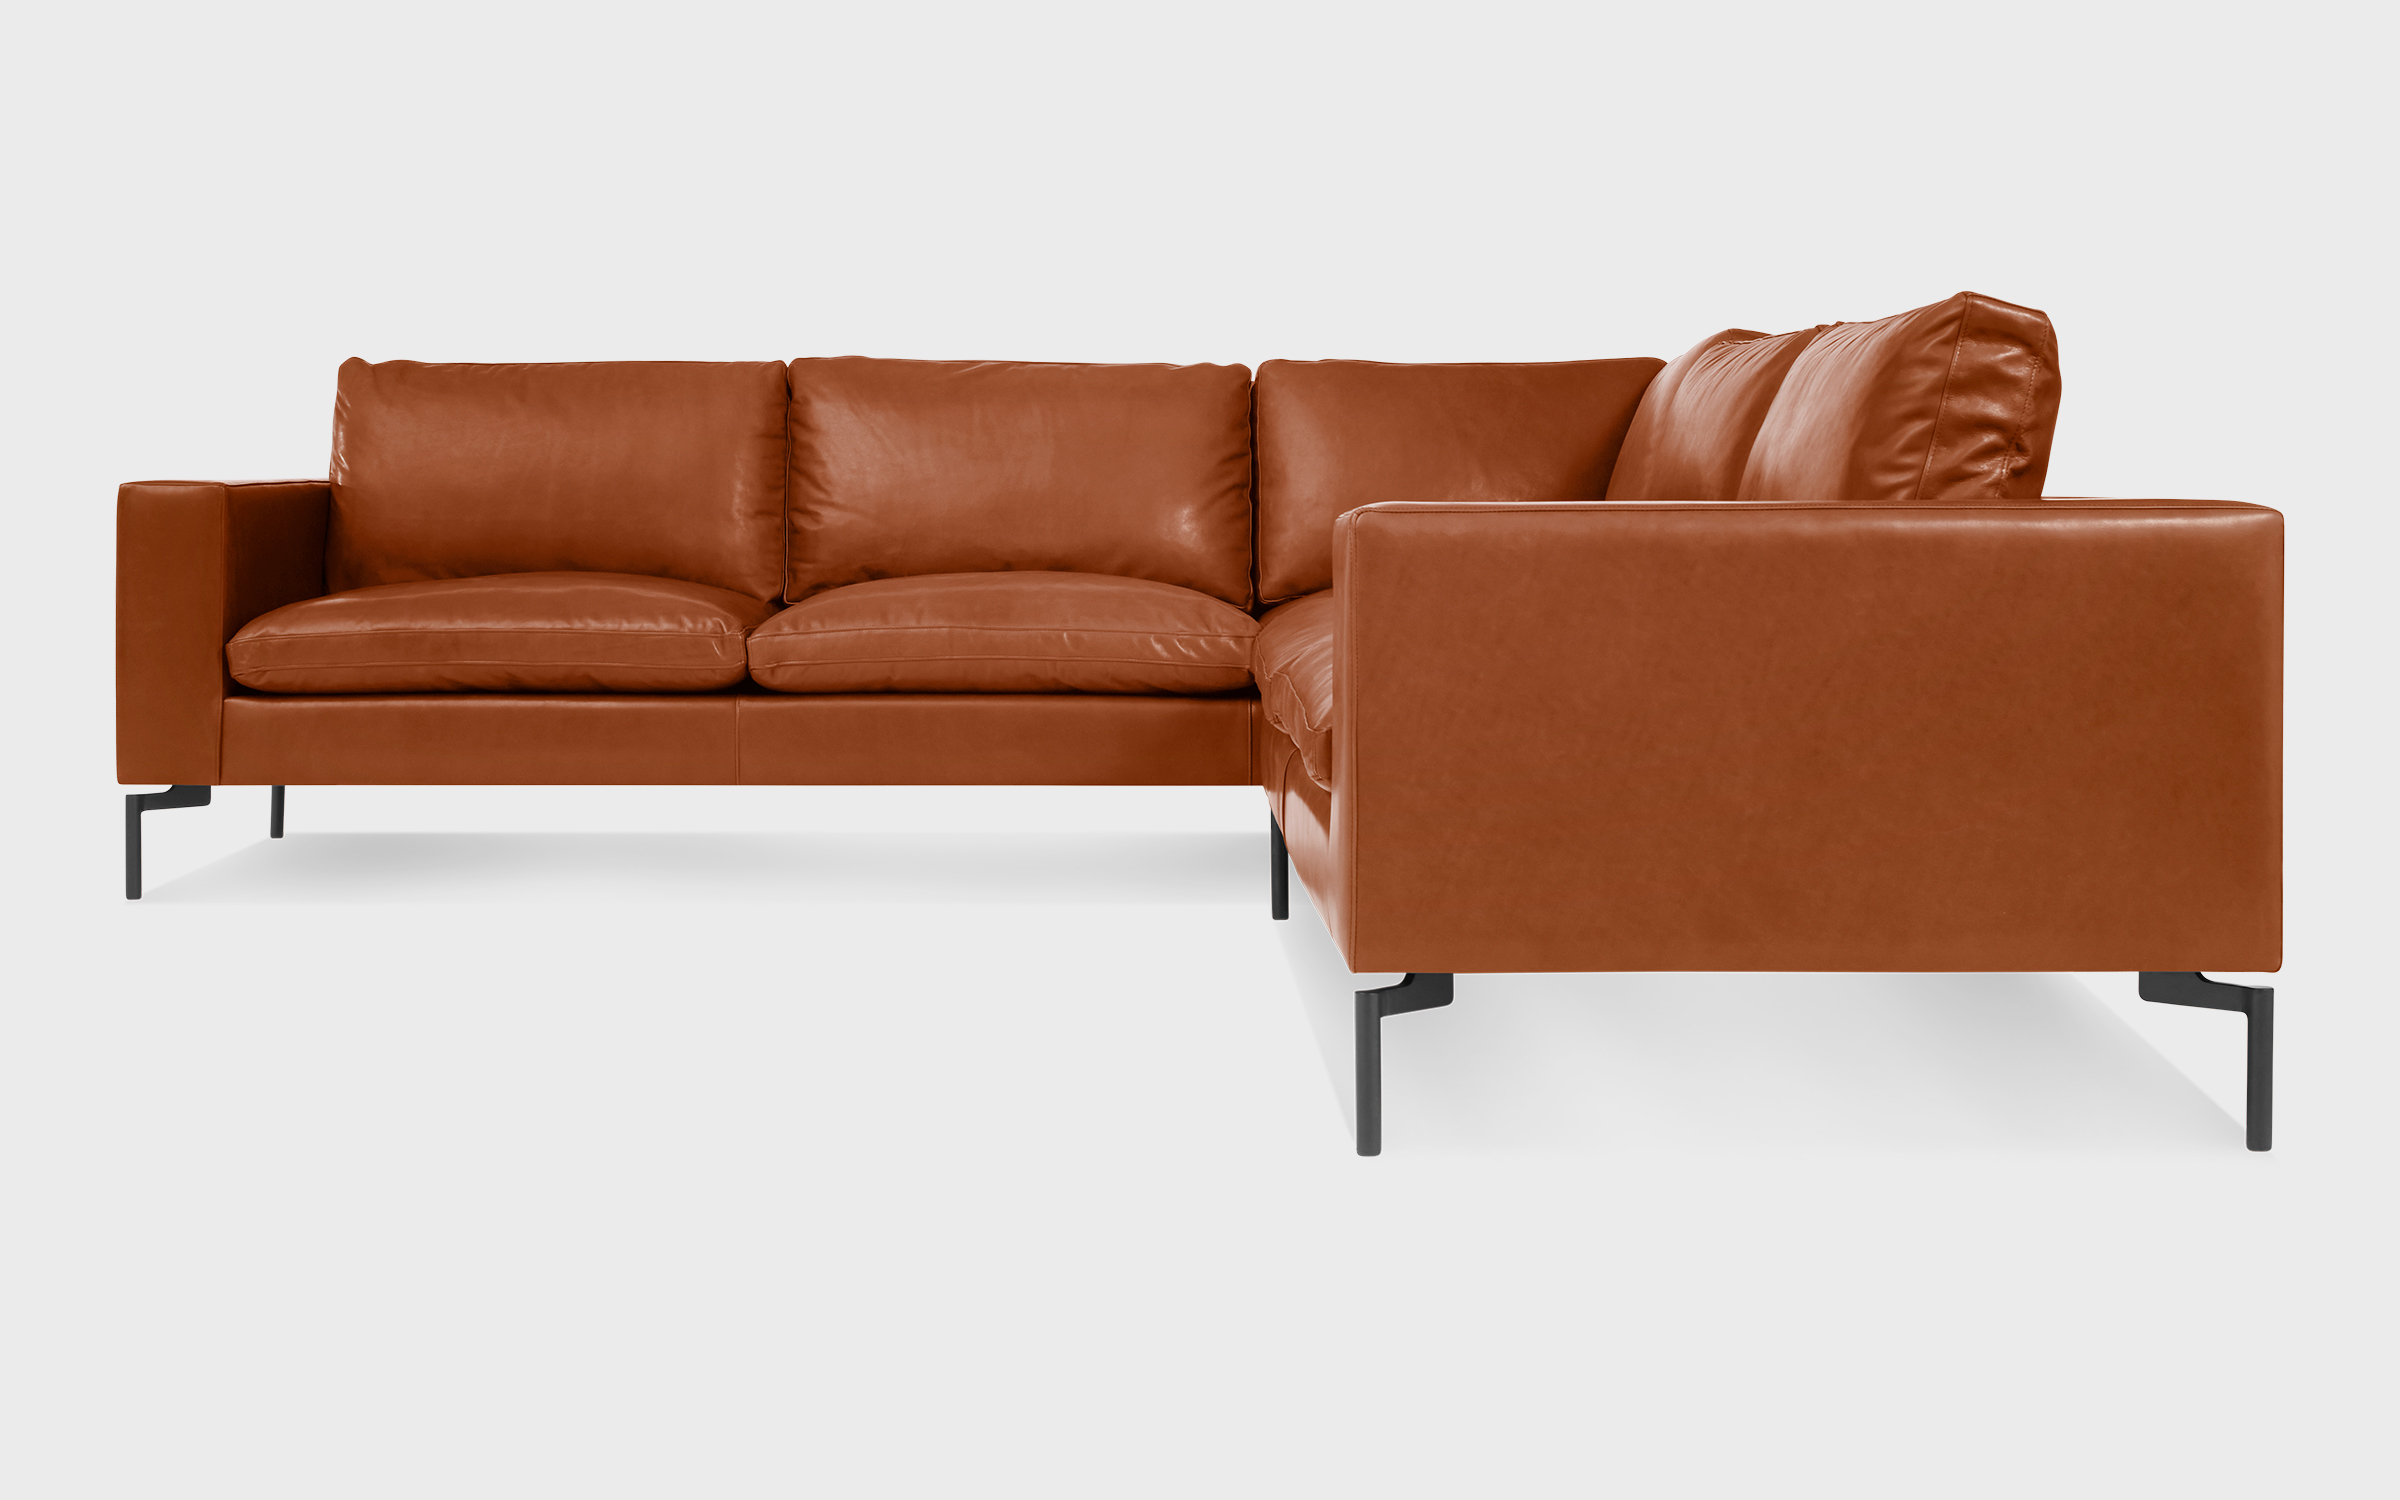 New Standard Left Leather Sectional Sofa - Small